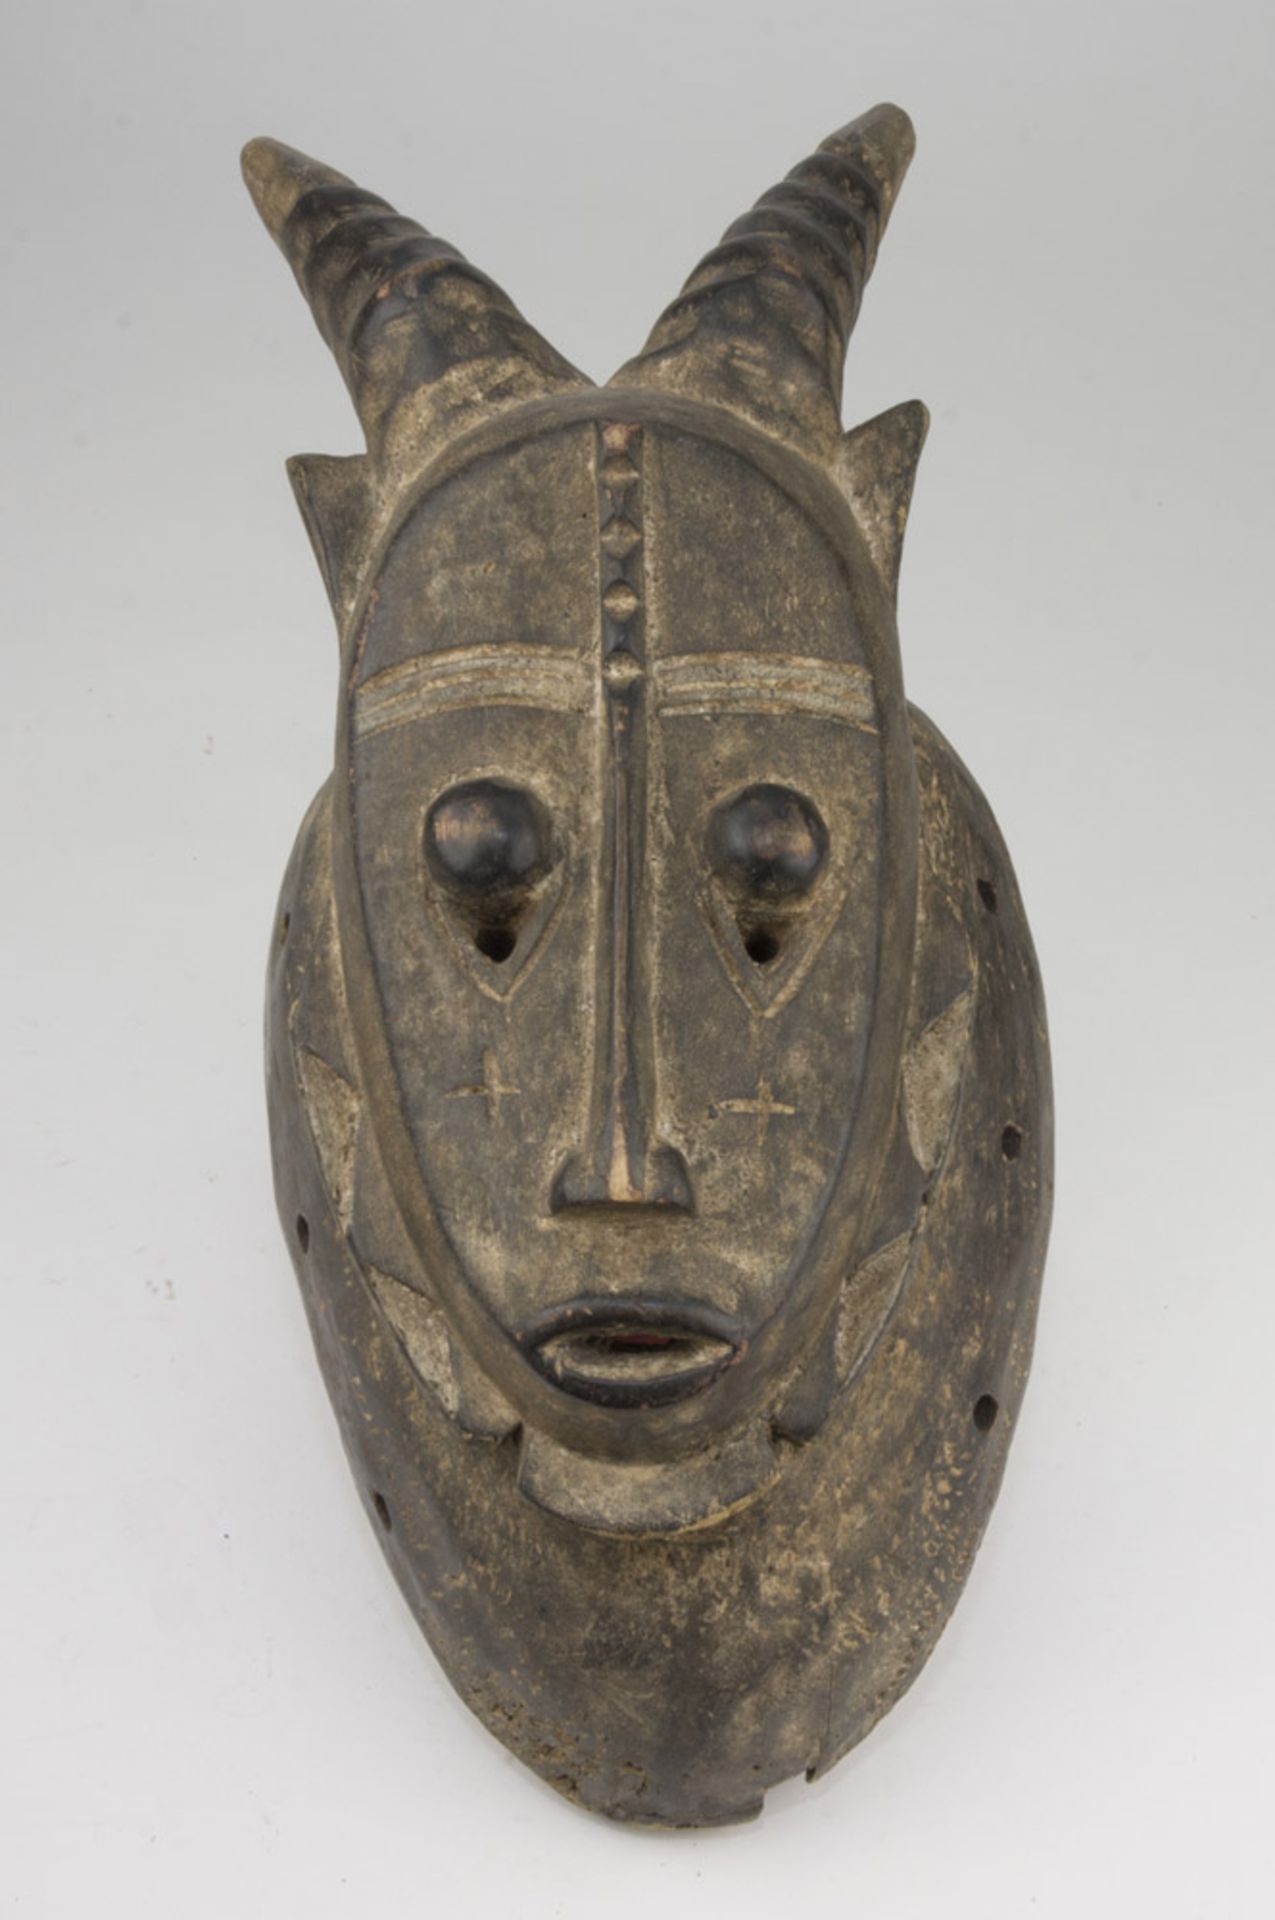 TWO WOODEN BAOULE' MASKS, IVORY COAST 20TH CENTURY - Image 2 of 2